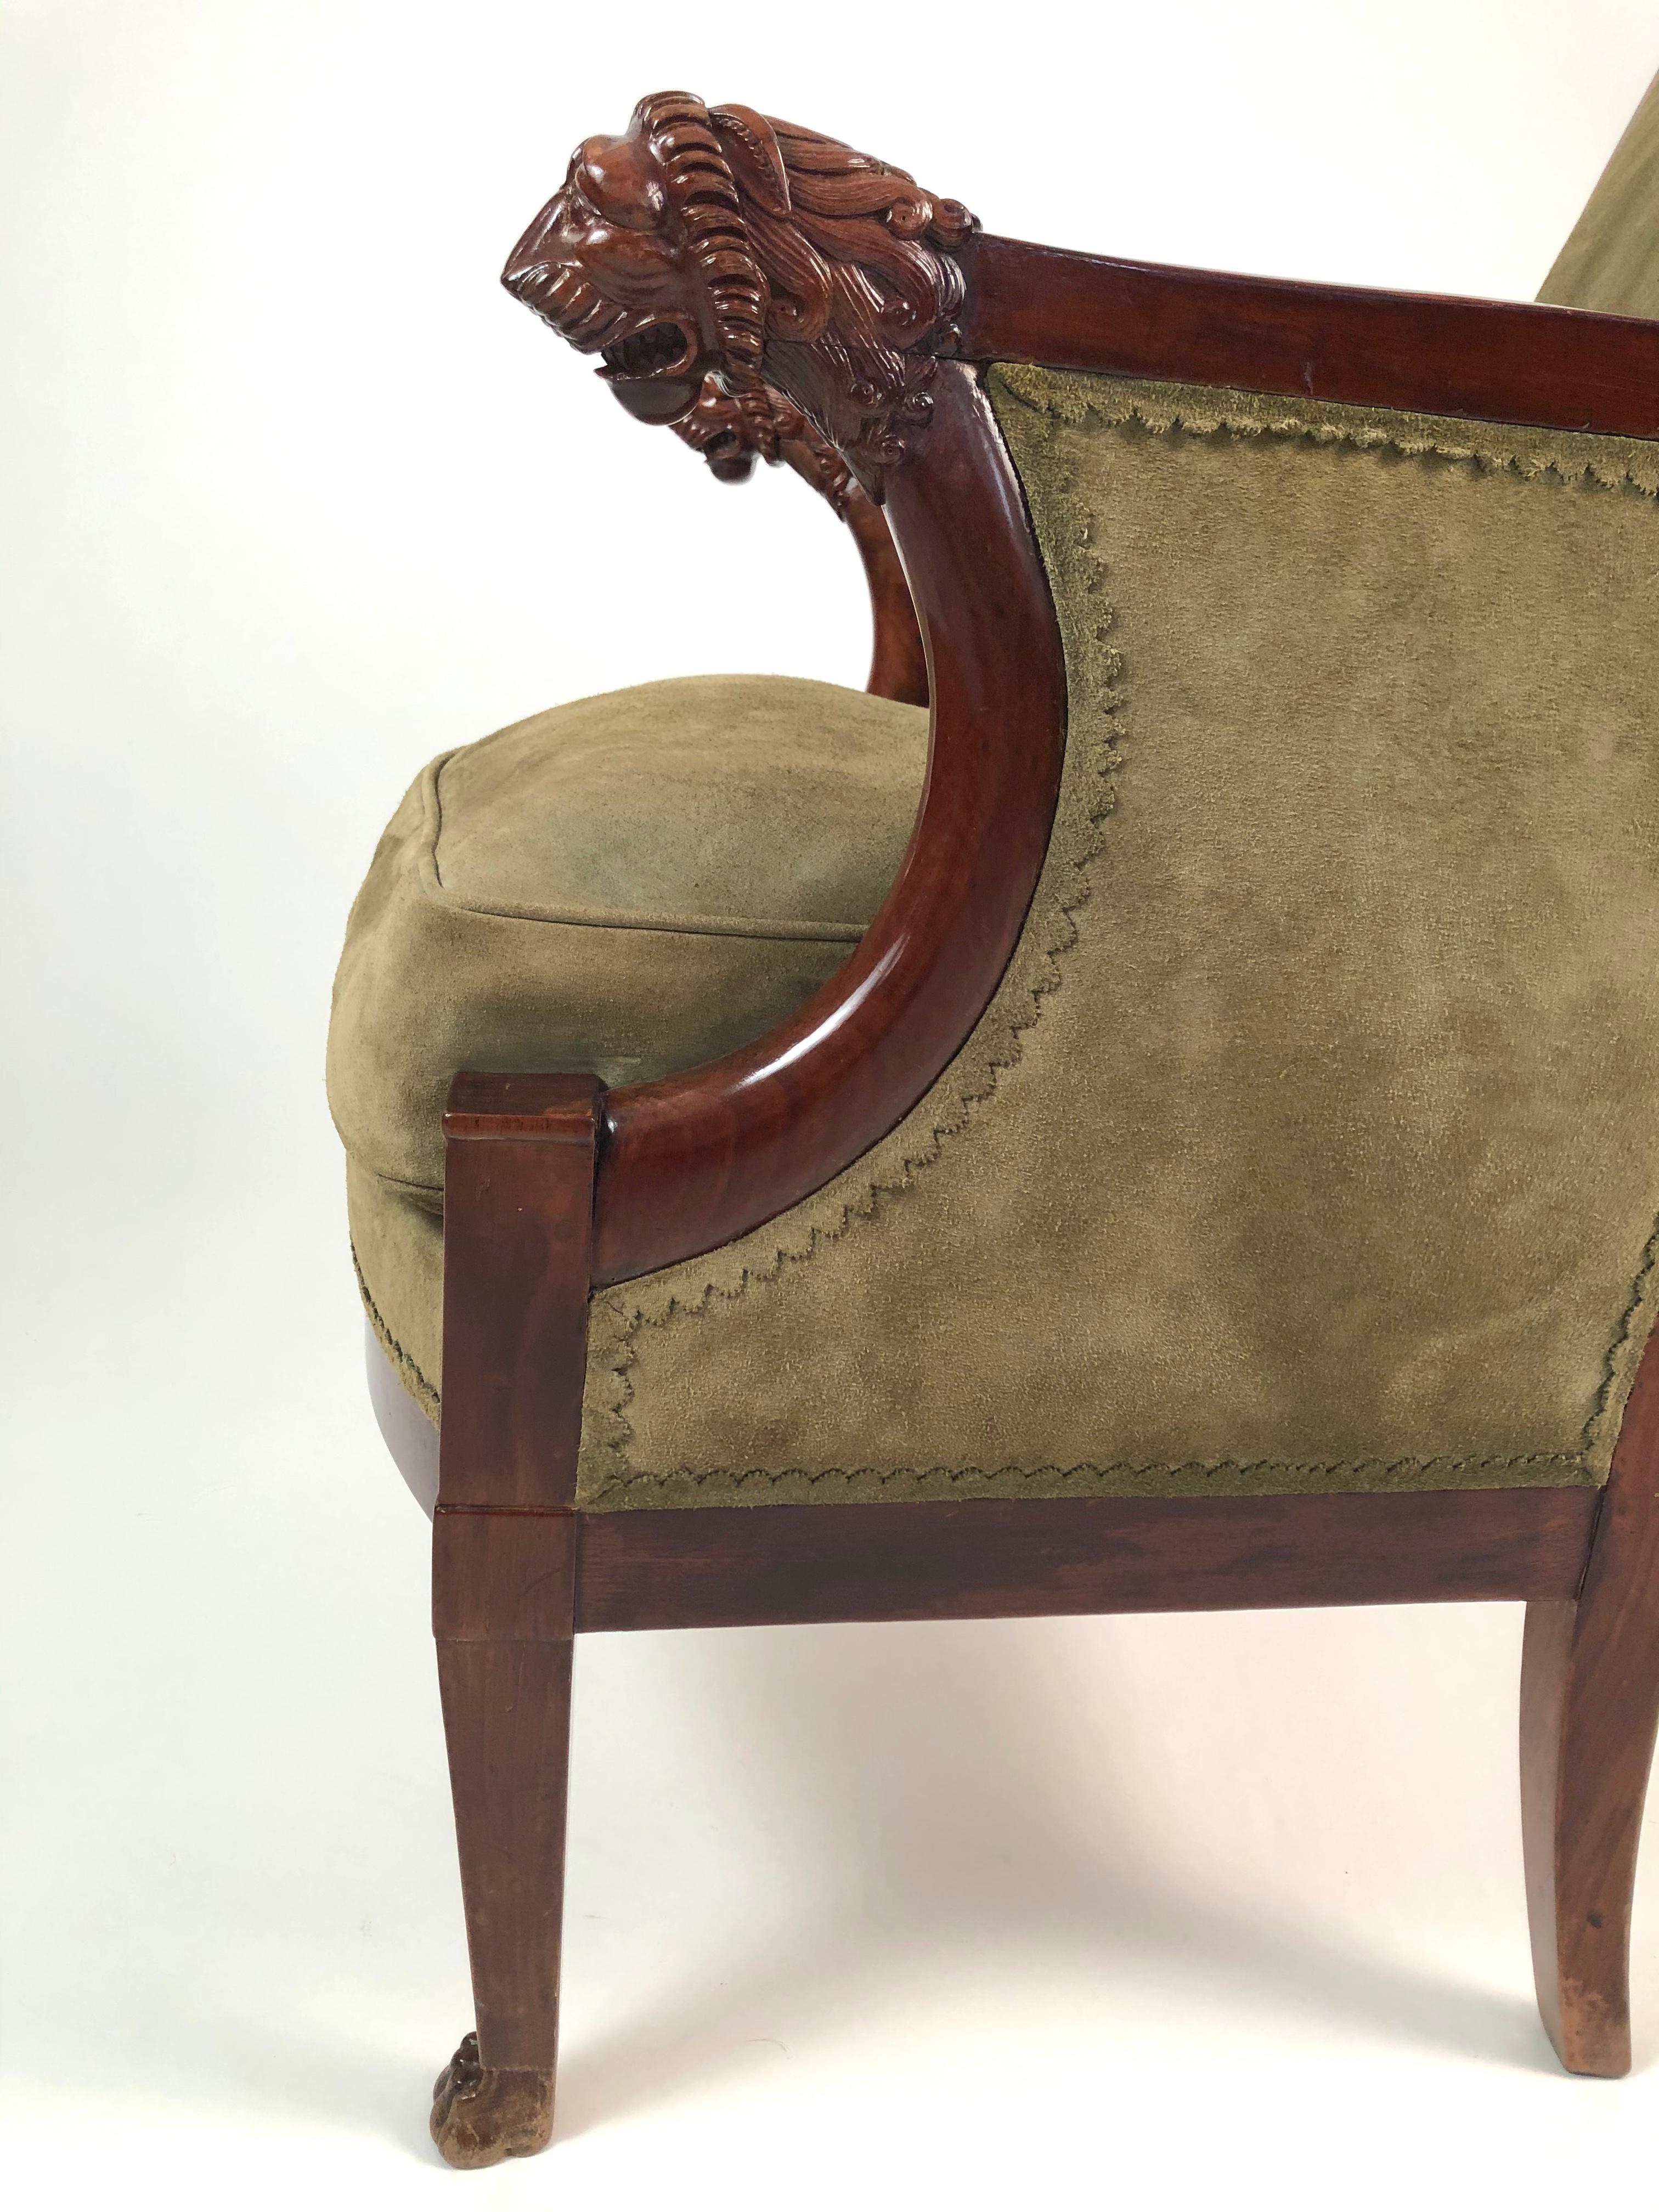 French Empire Mahogany Fauteuil with Carved Lion's Head Armrests circa 1805-1810 1